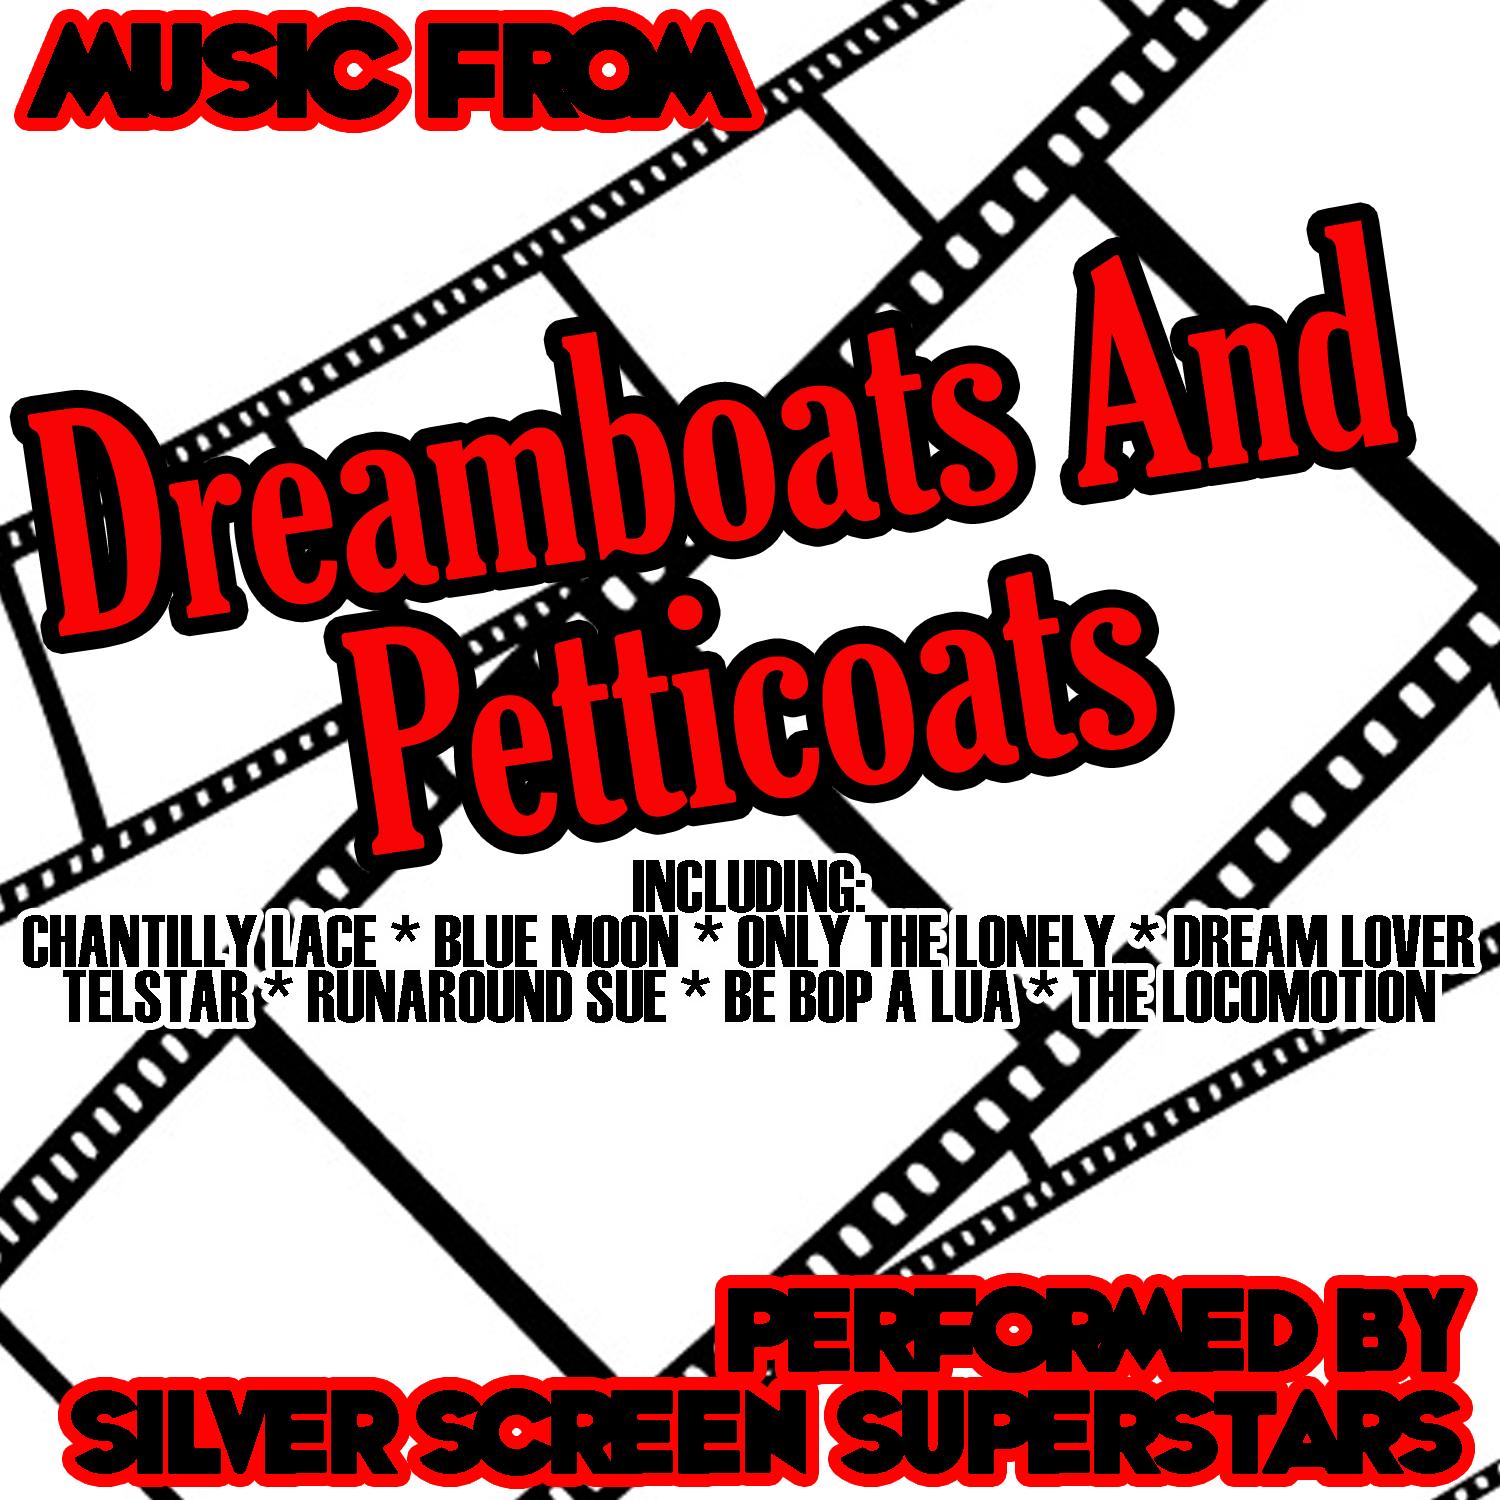 Music From: Dreamcoats And Petticoats